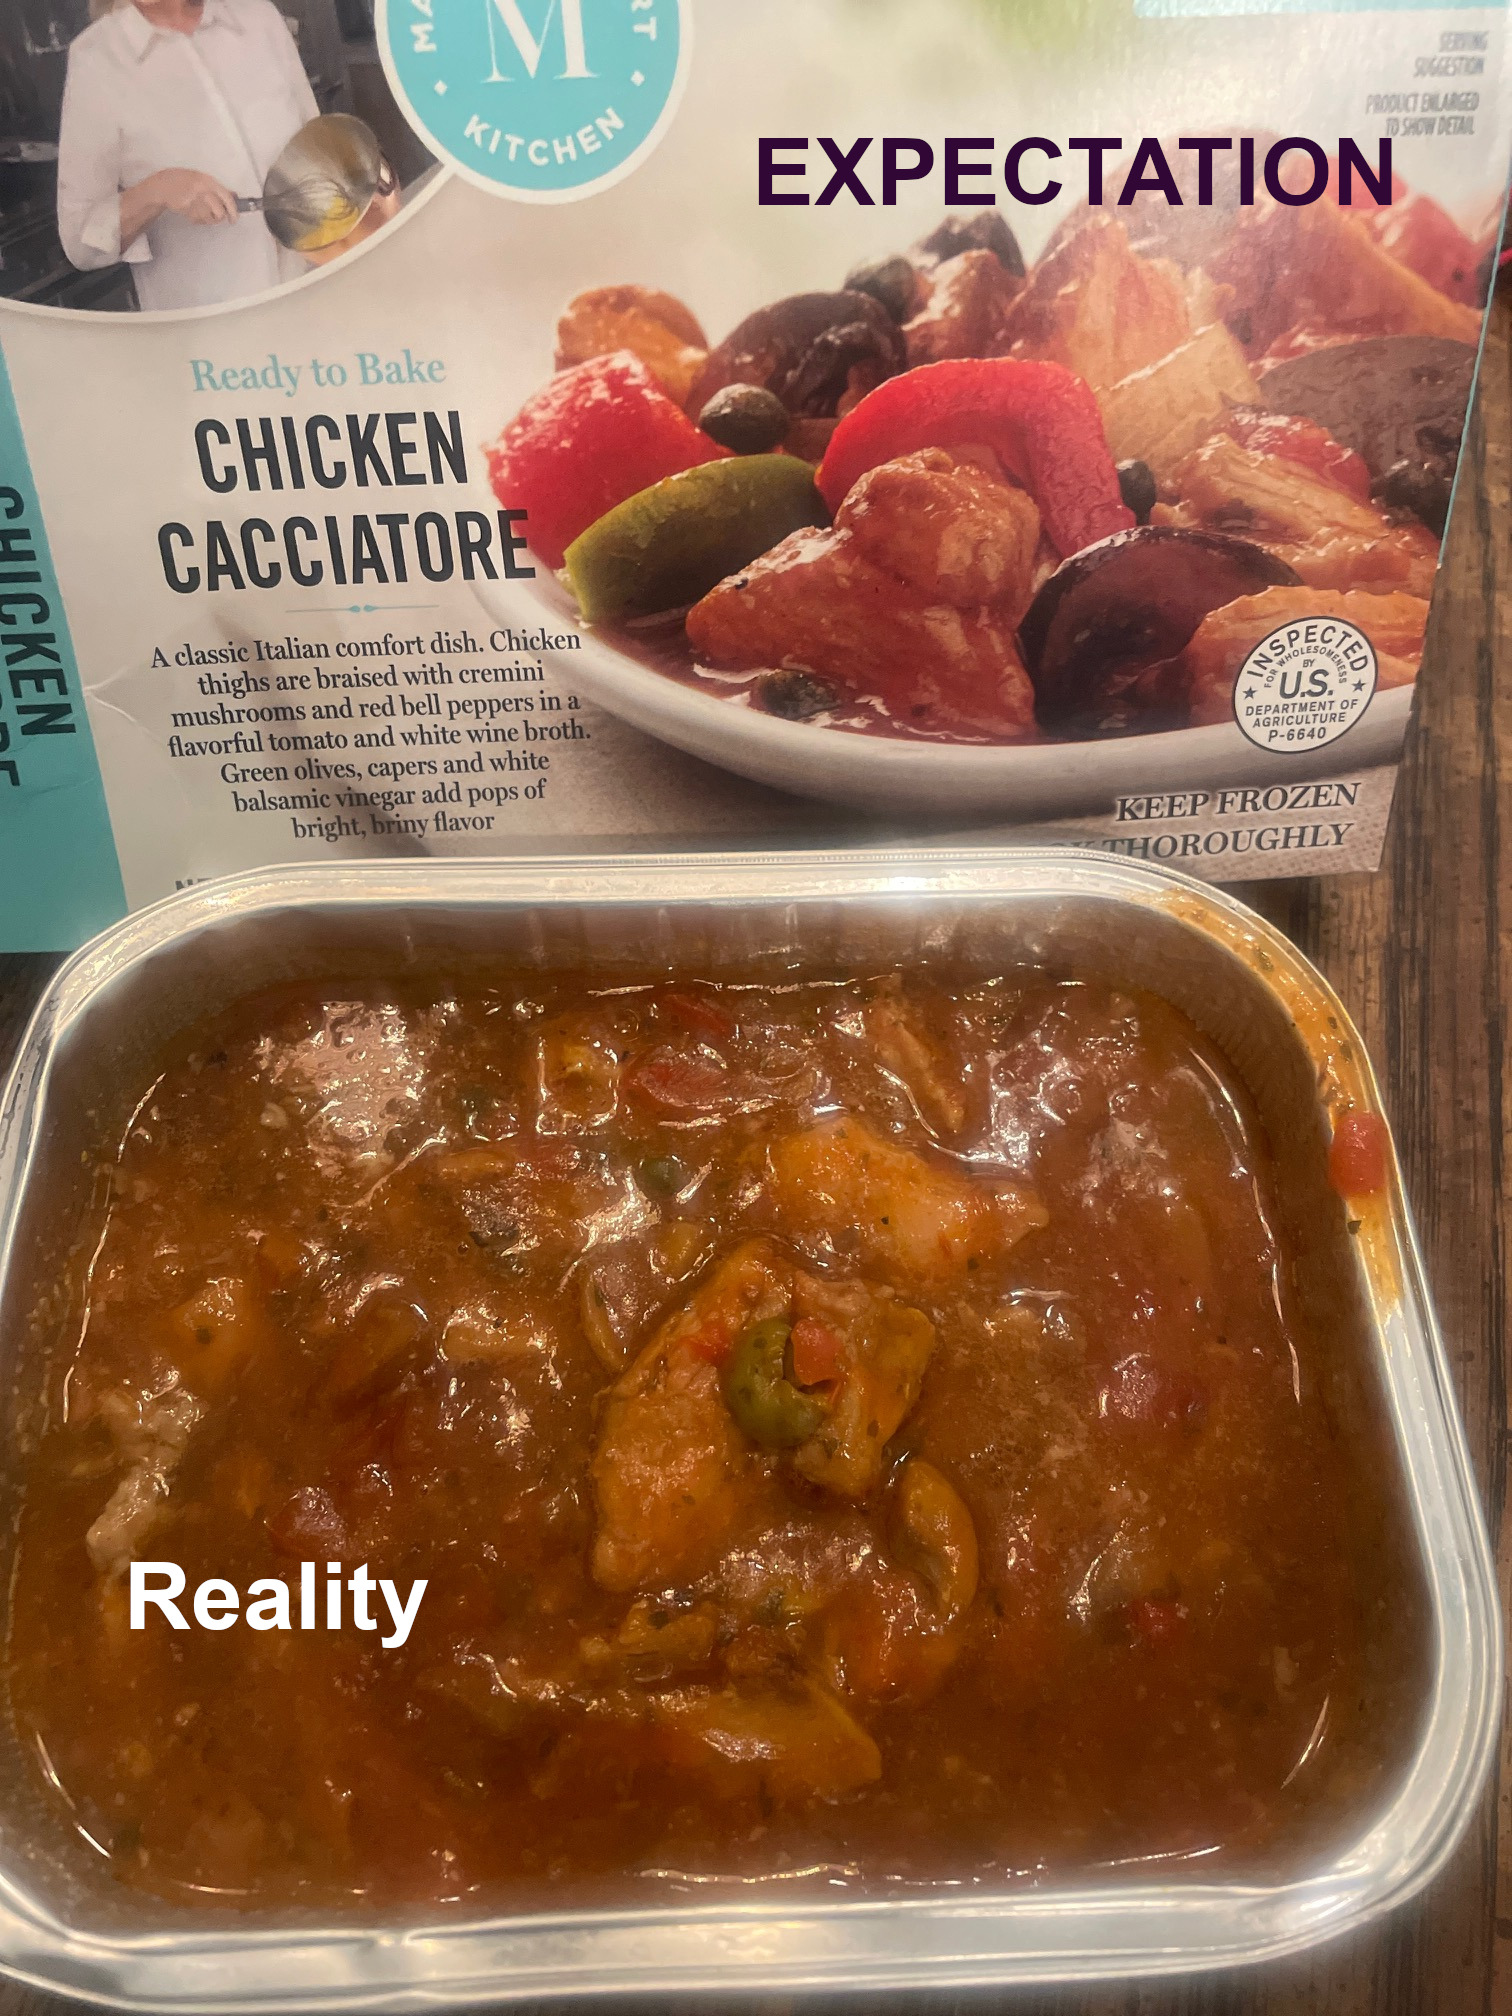 Expectations vs Reality memes - curry - Ken M Kitchen Ready to Bake Chicken Cacciatore Allant dish, Chicken thighs are bralend with semin sushnomsnd red bell peppers ina Haveful win and white wine berth Geen olles opers and white halwe vinegar all pepe of